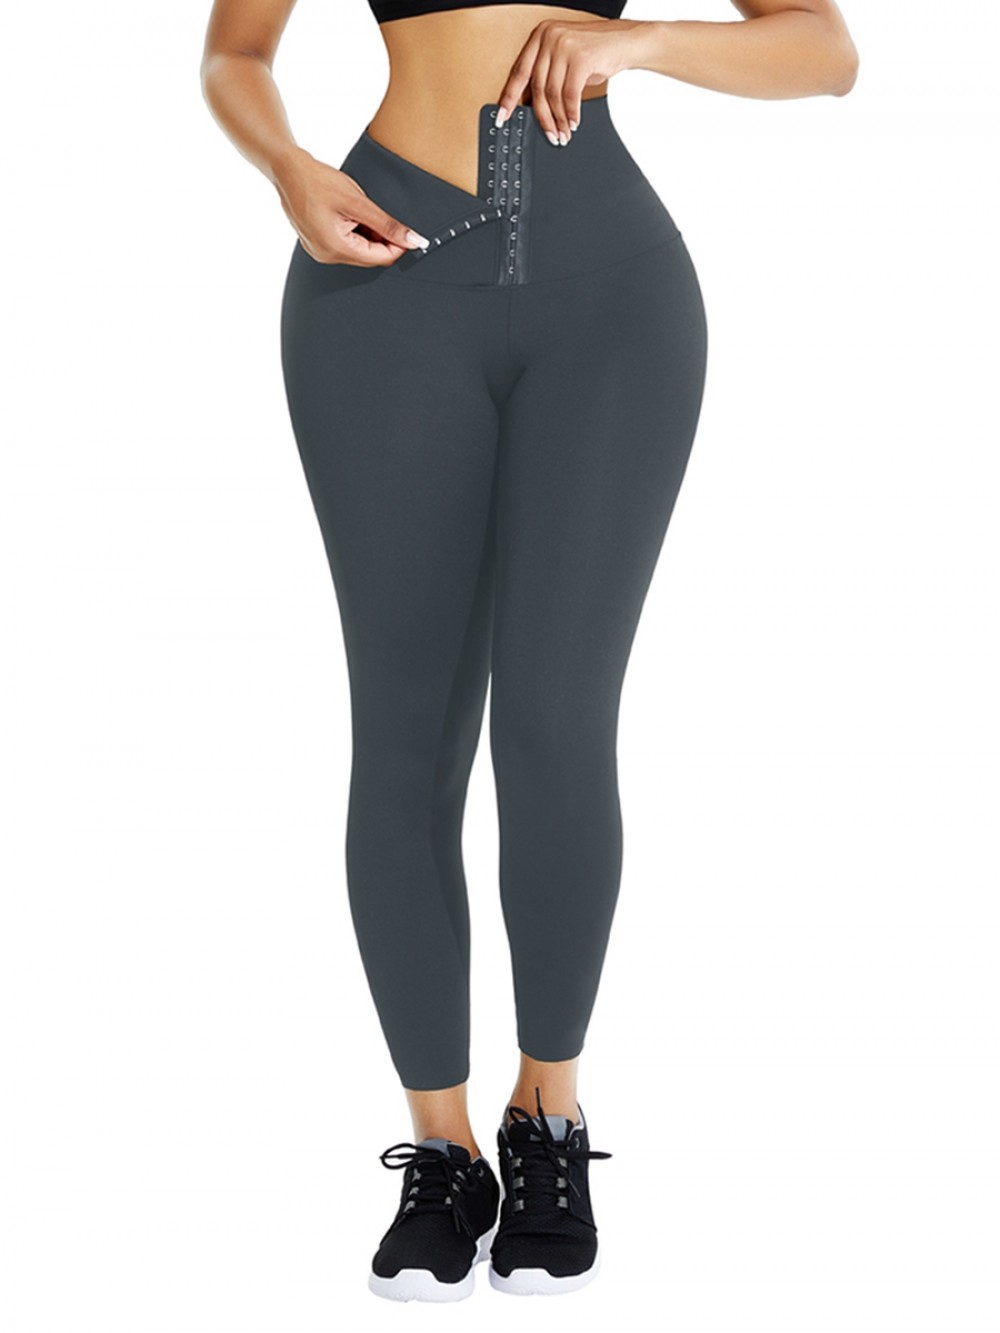 Highest Compression Gray Waist Trainer Leggings With Hooks